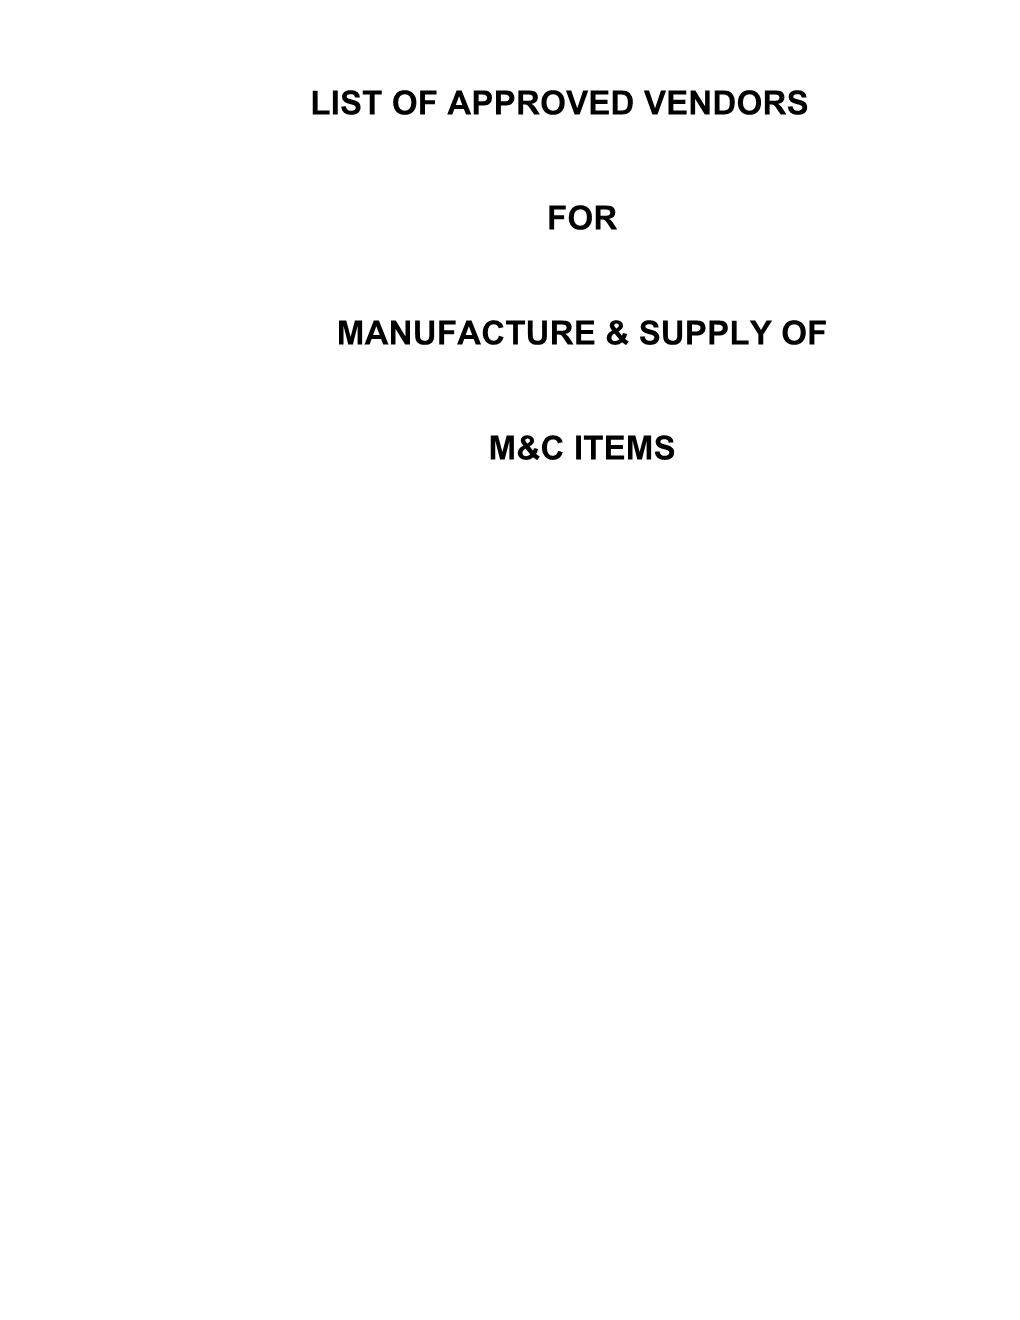 List of Approved Vendors for Manufacture & Supply Of